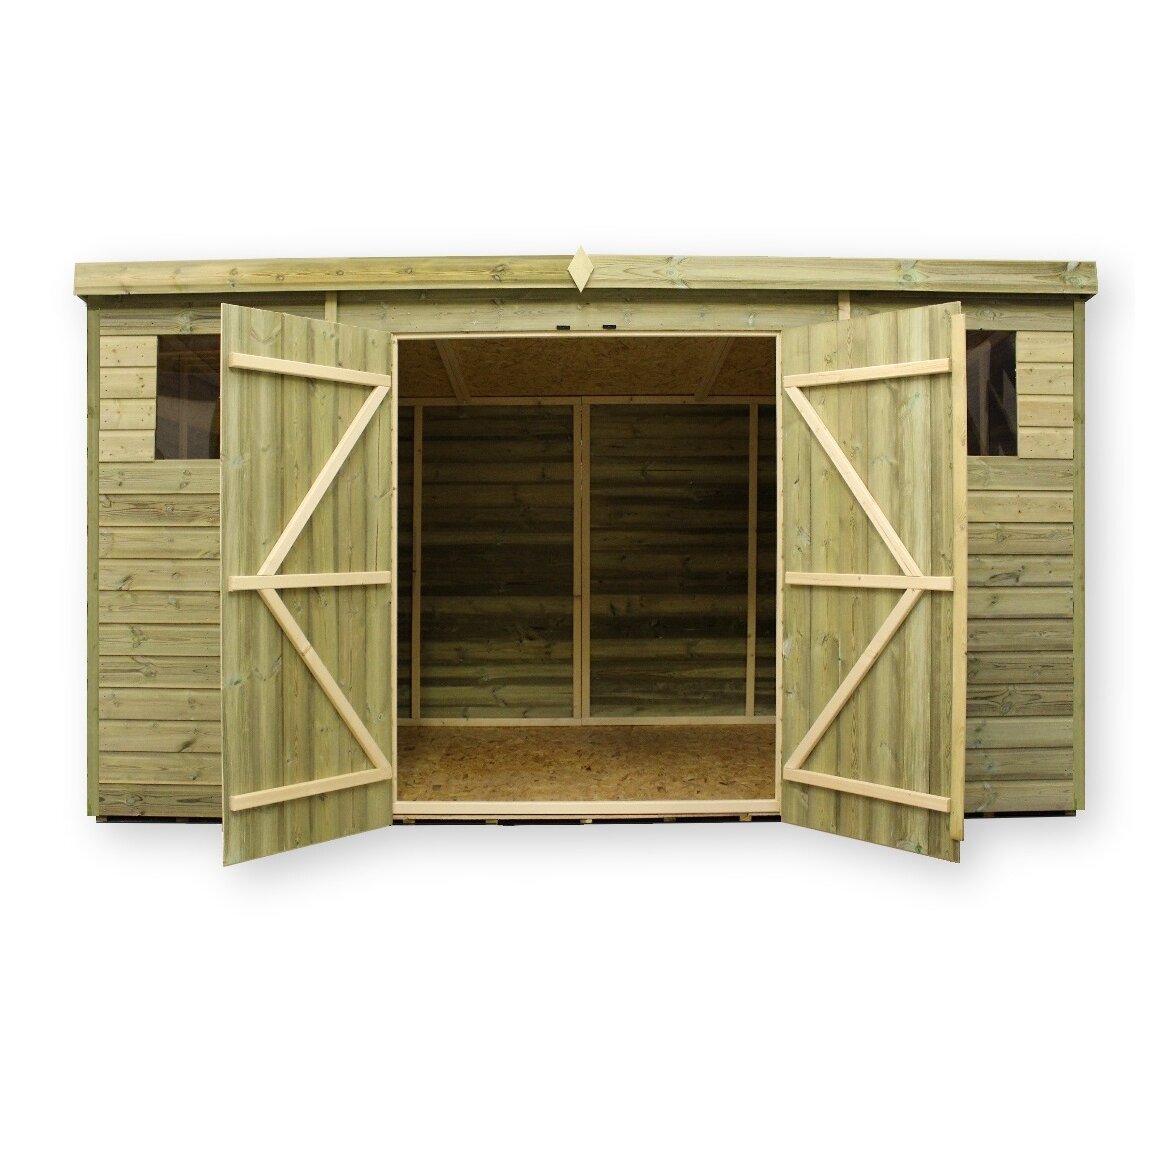 Empire Sheds Ltd 12 x 4 Wooden Lean-To Shed | Wayfair.co.uk